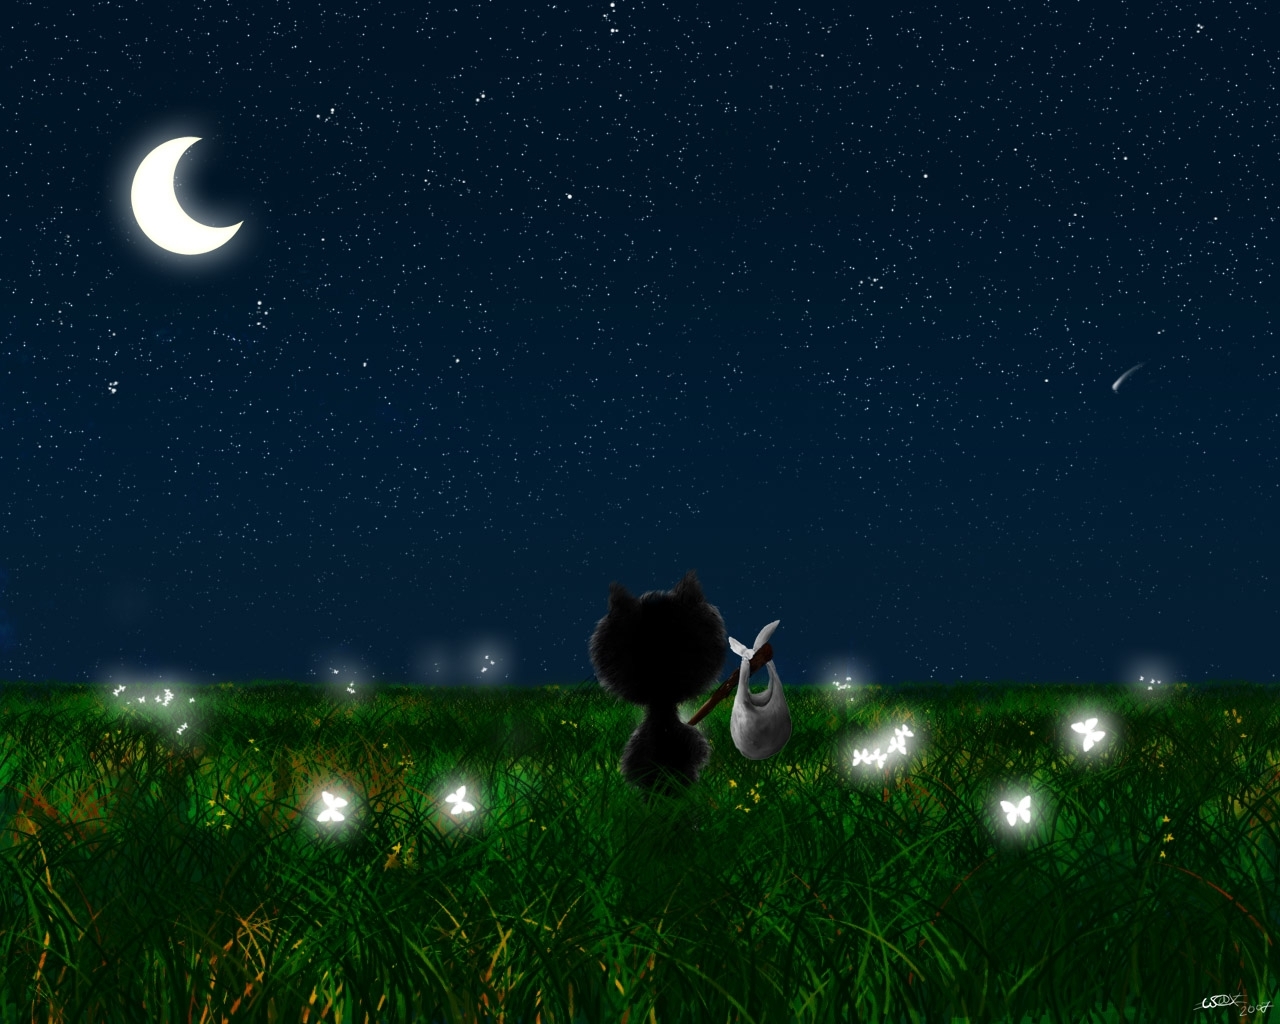 pictures, black, cats, landscape, grass, night, moon 2160p